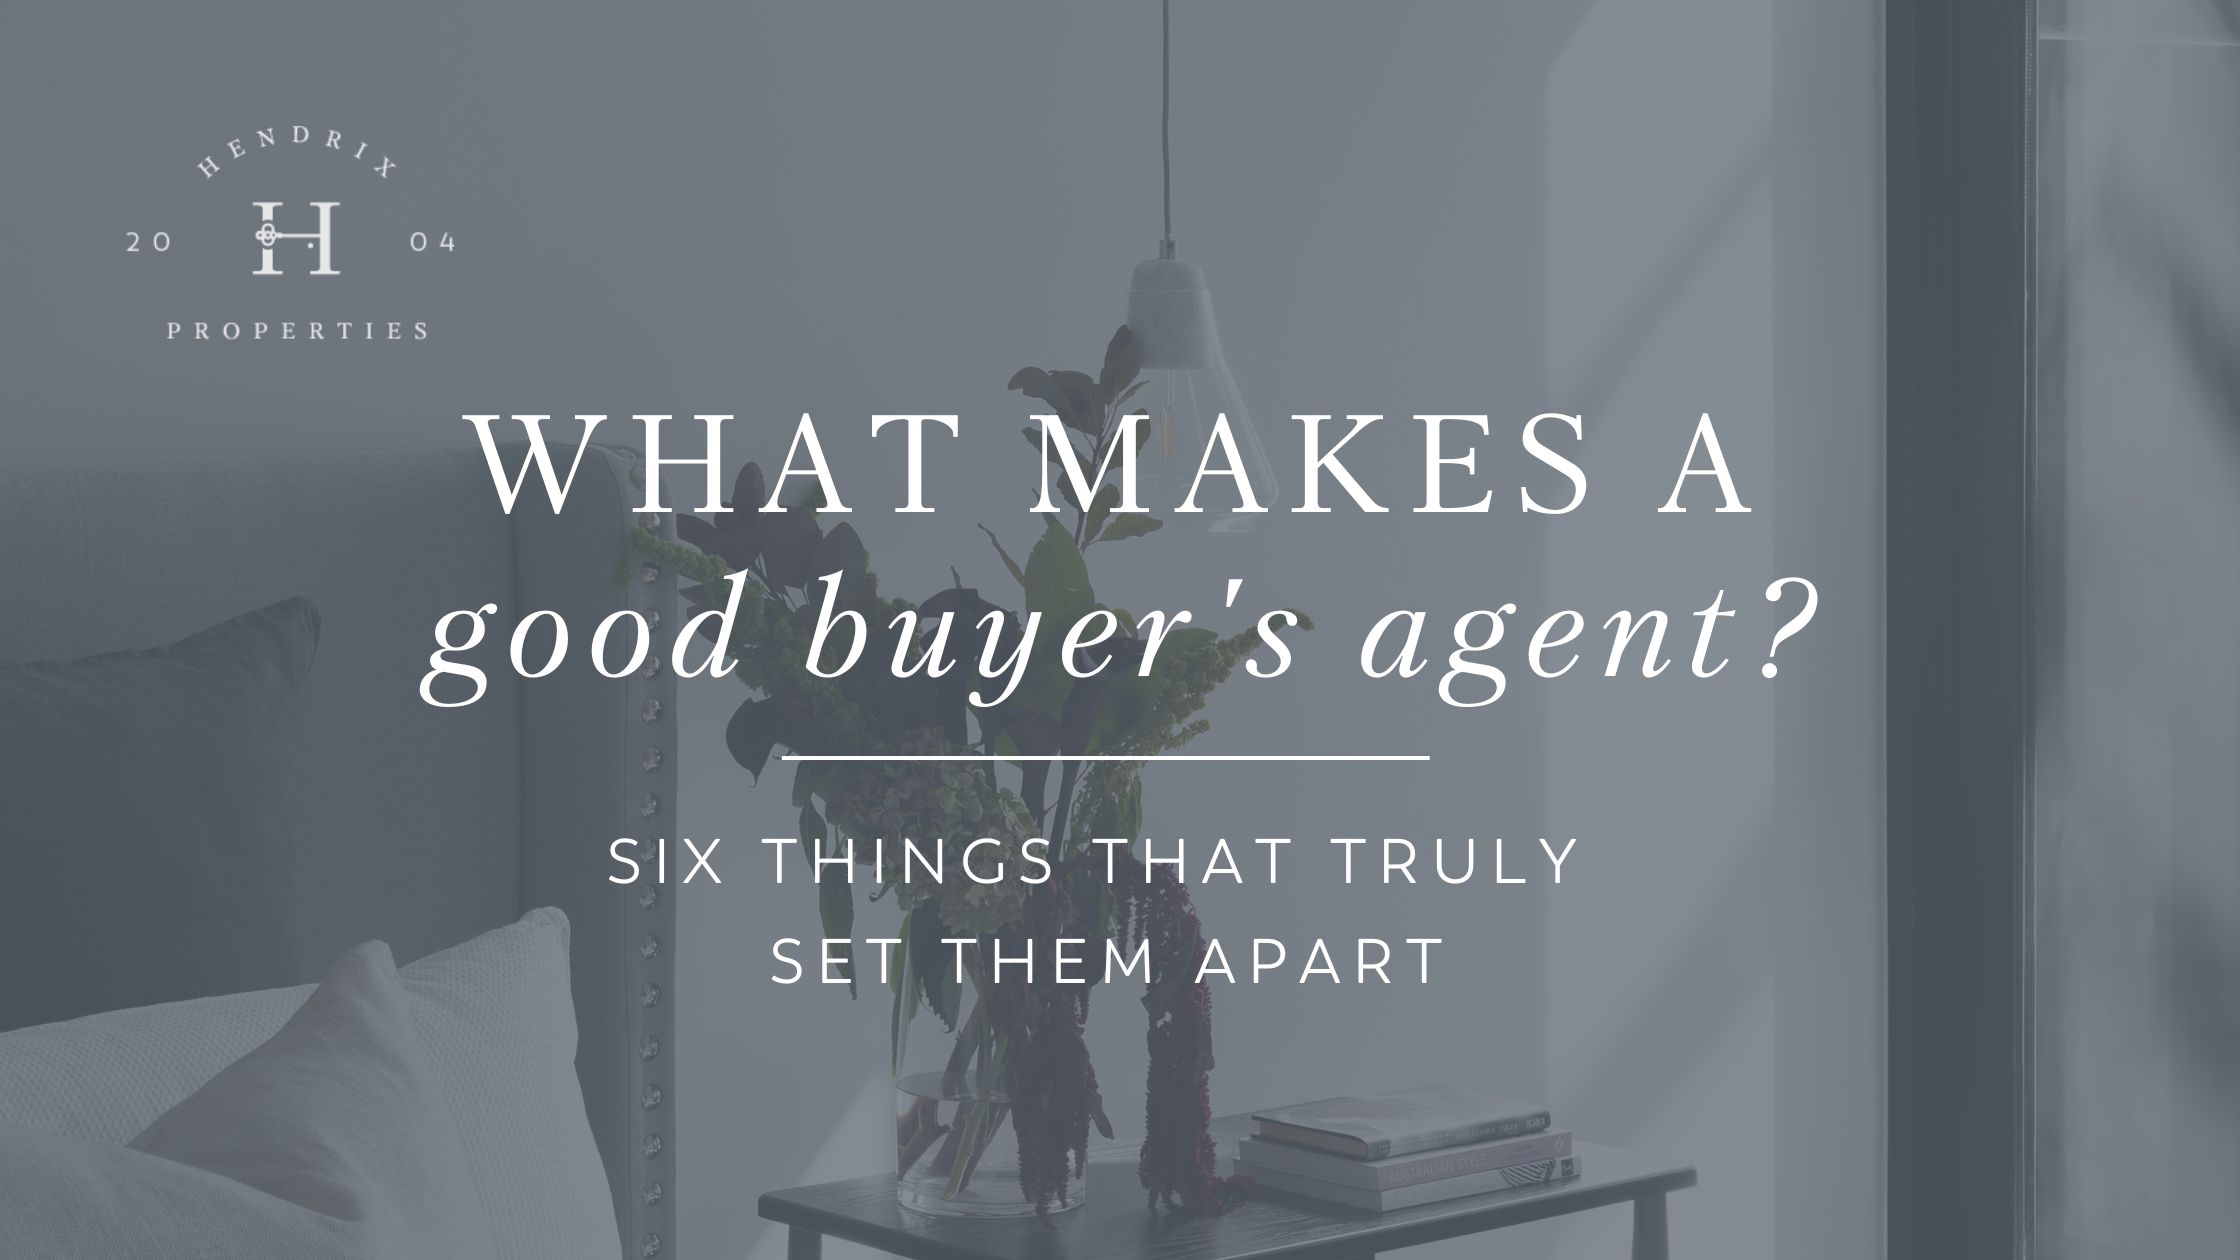 Characteristics of a good buyer's agent